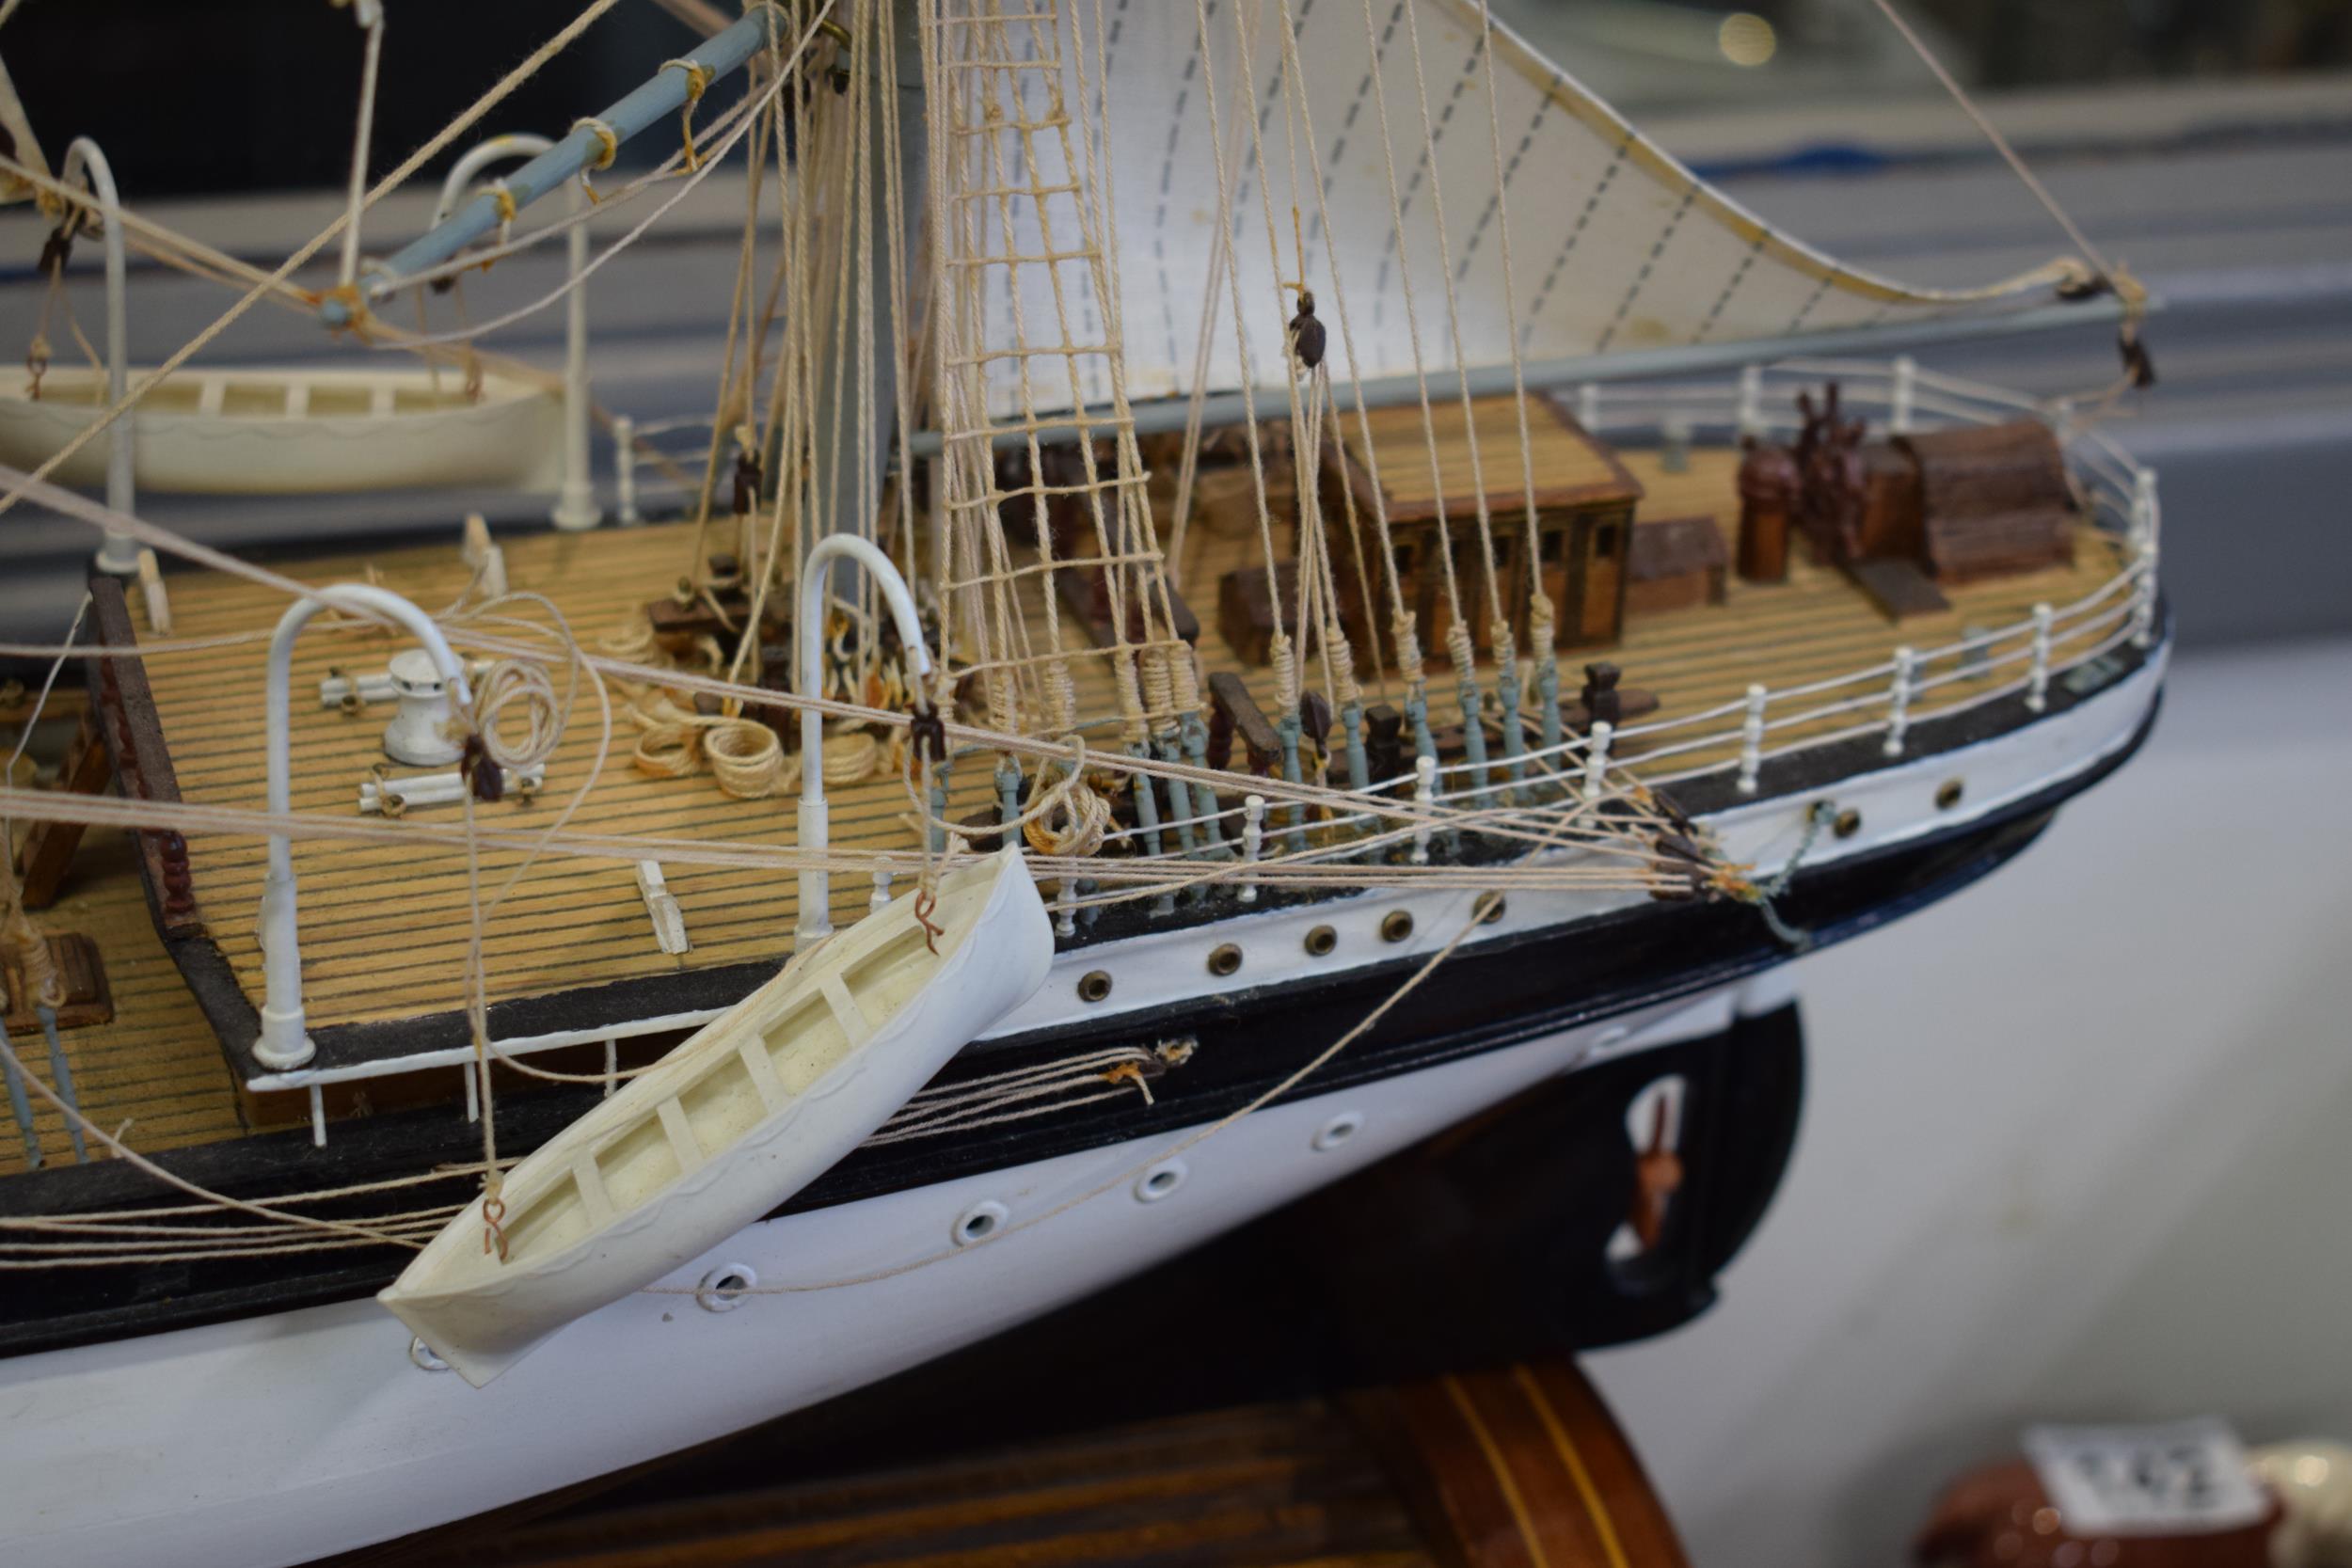 Kit built model of a sailing vessel / galleon, with German flag, mounted onto wooden stand, mostly - Image 6 of 10